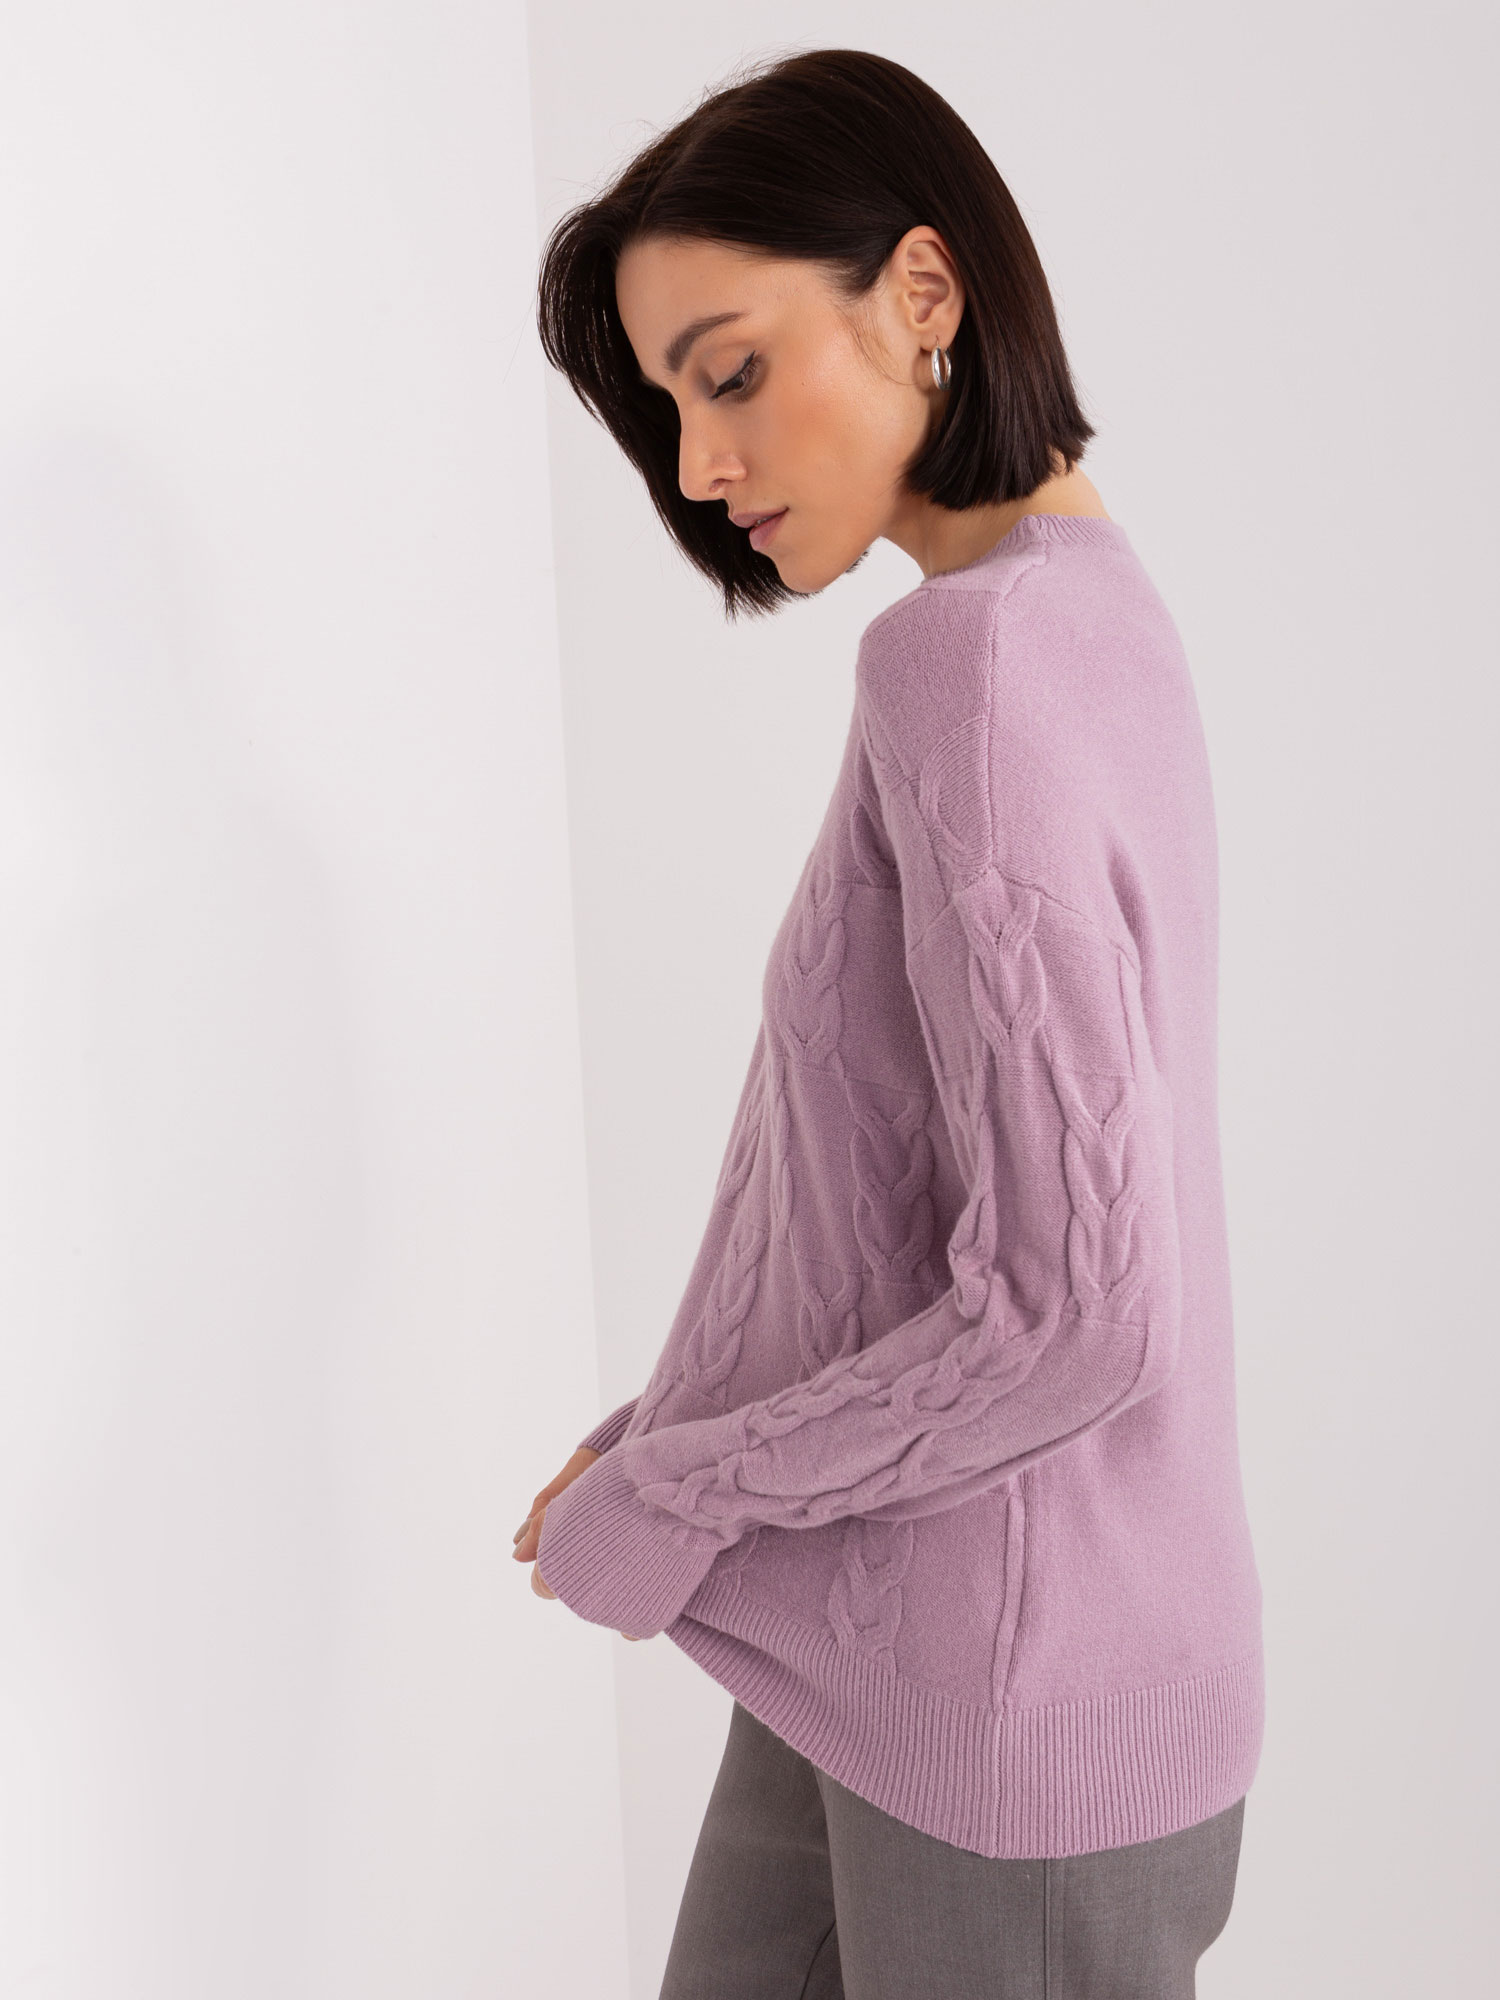 Purple Women's Sweater With Cables And Long Sleeves